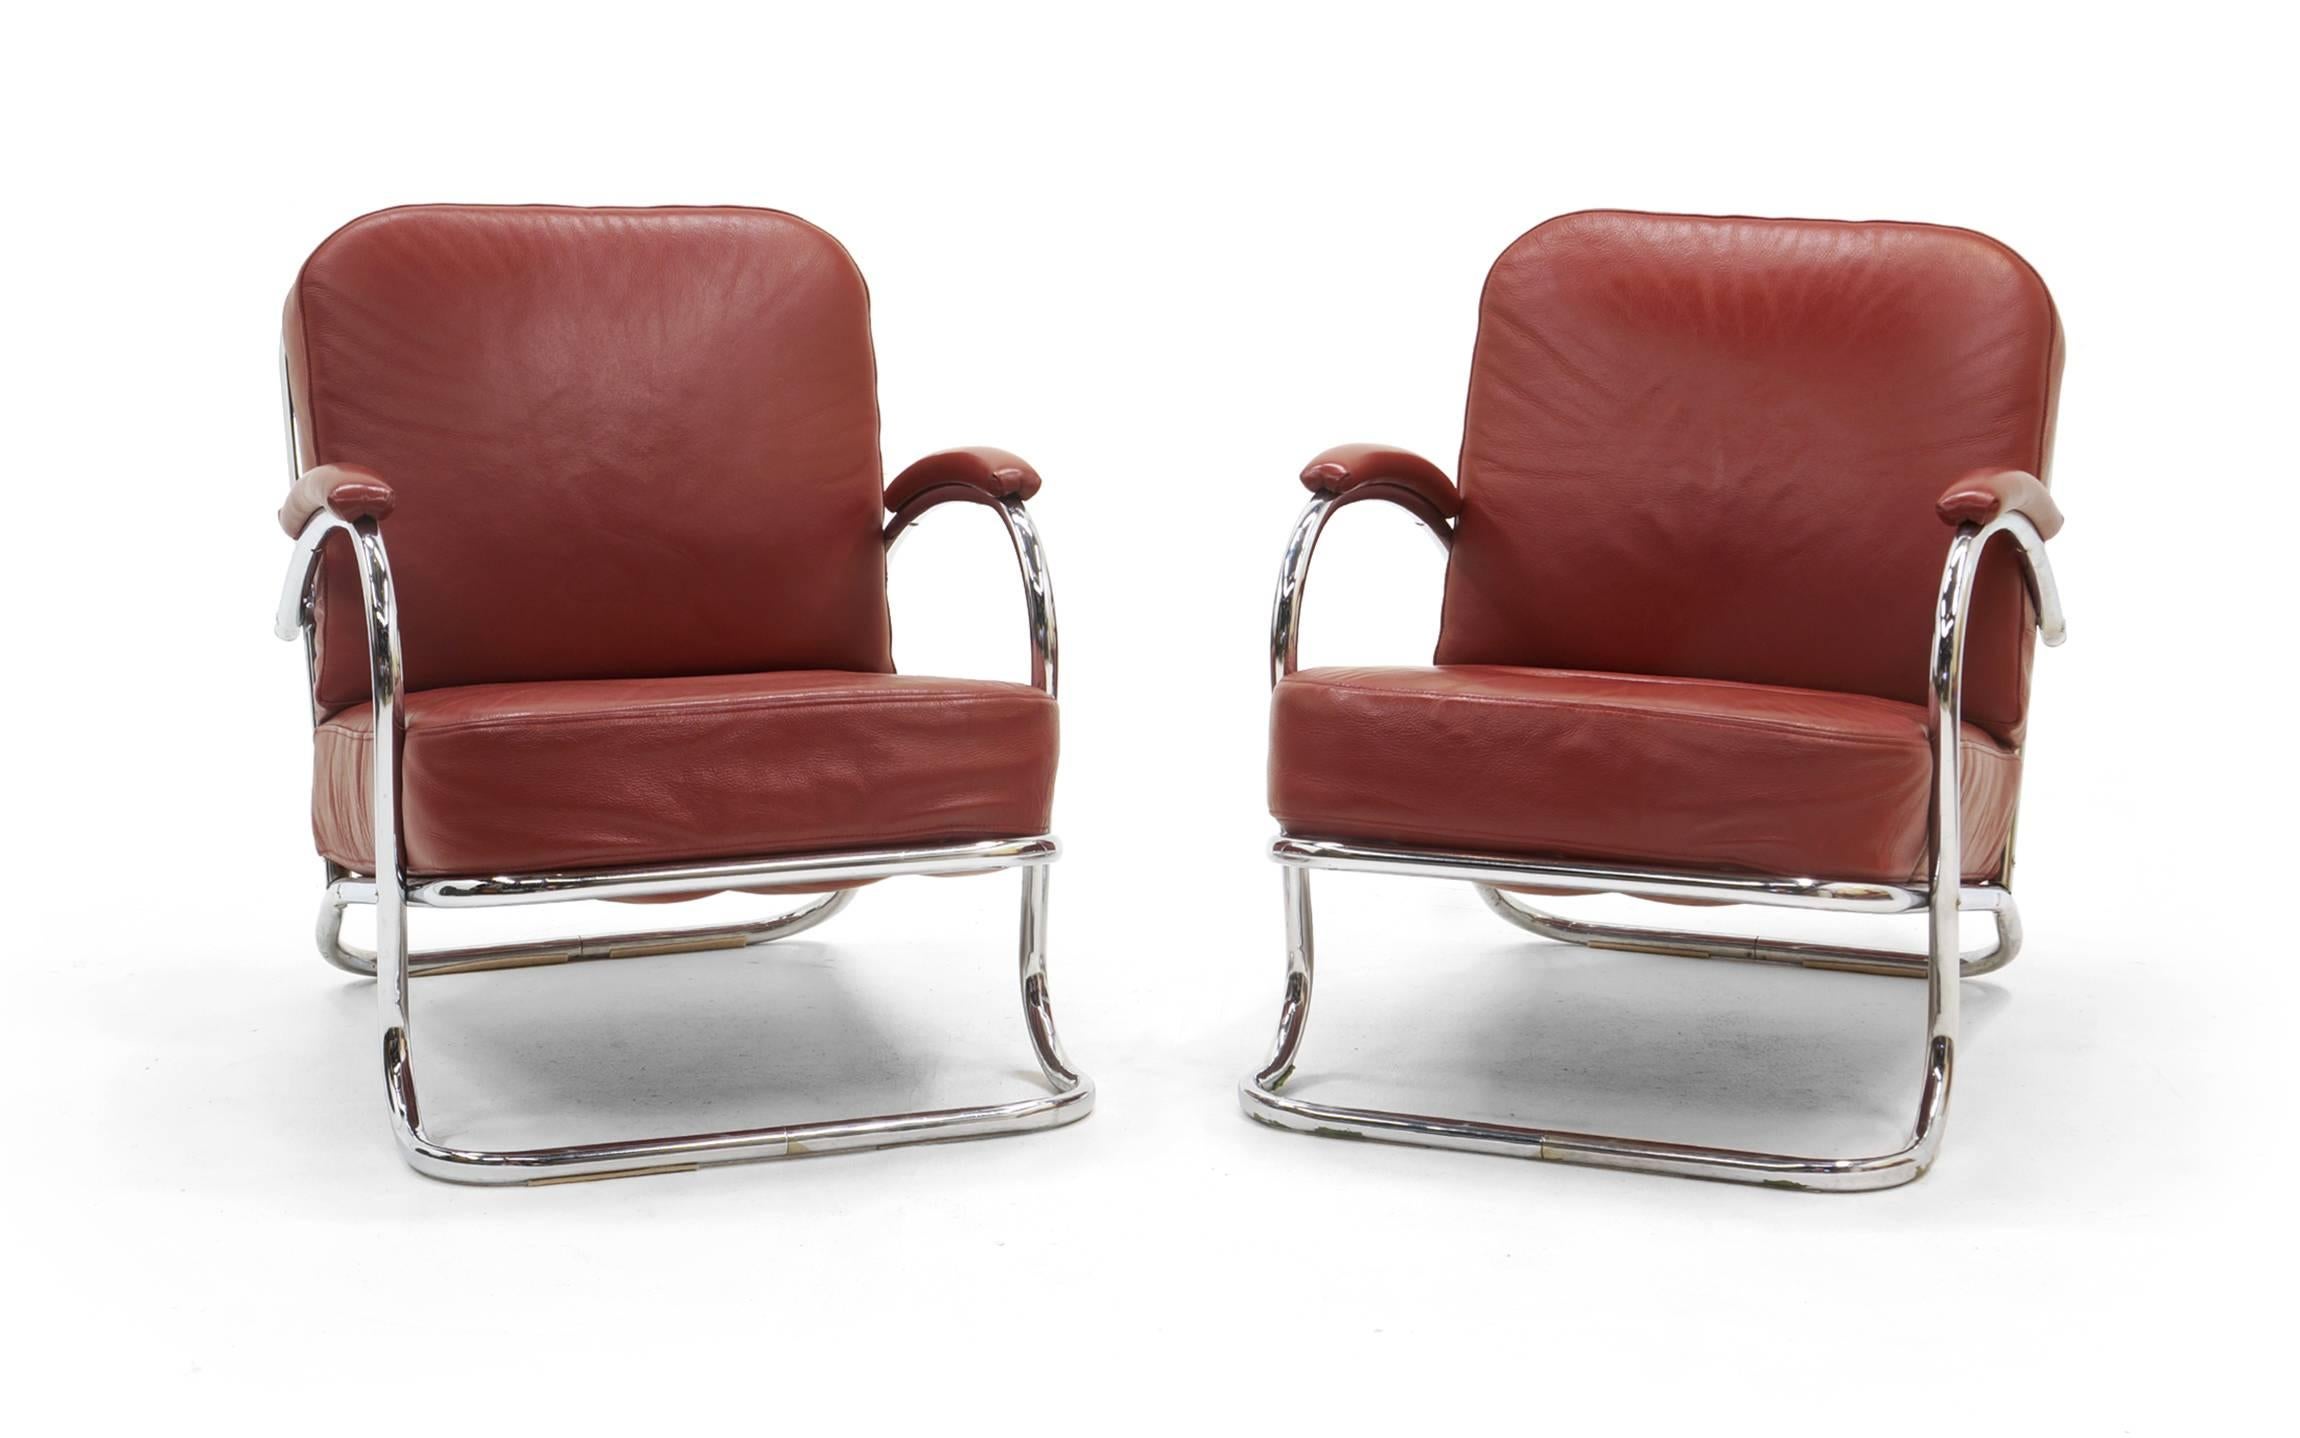 KEM Weber Art Deco / Machine Age lounge chairs. Tubular chrome frames and reupholstered in red leather. Beautiful pair.